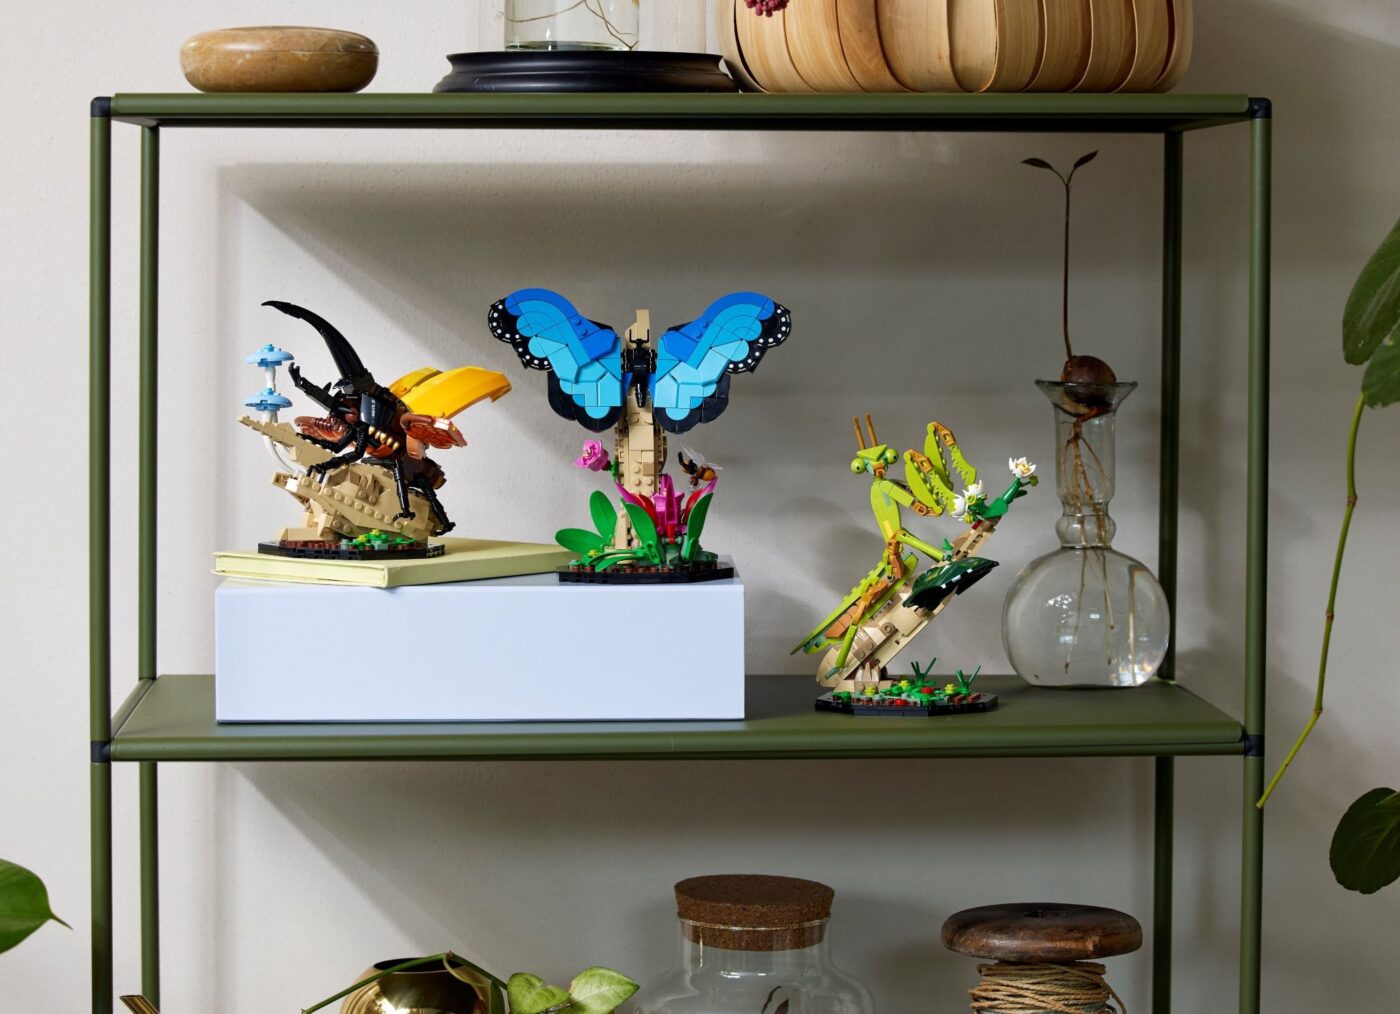 21342 LEGO Insect Collection Lifestyle Display Shelf